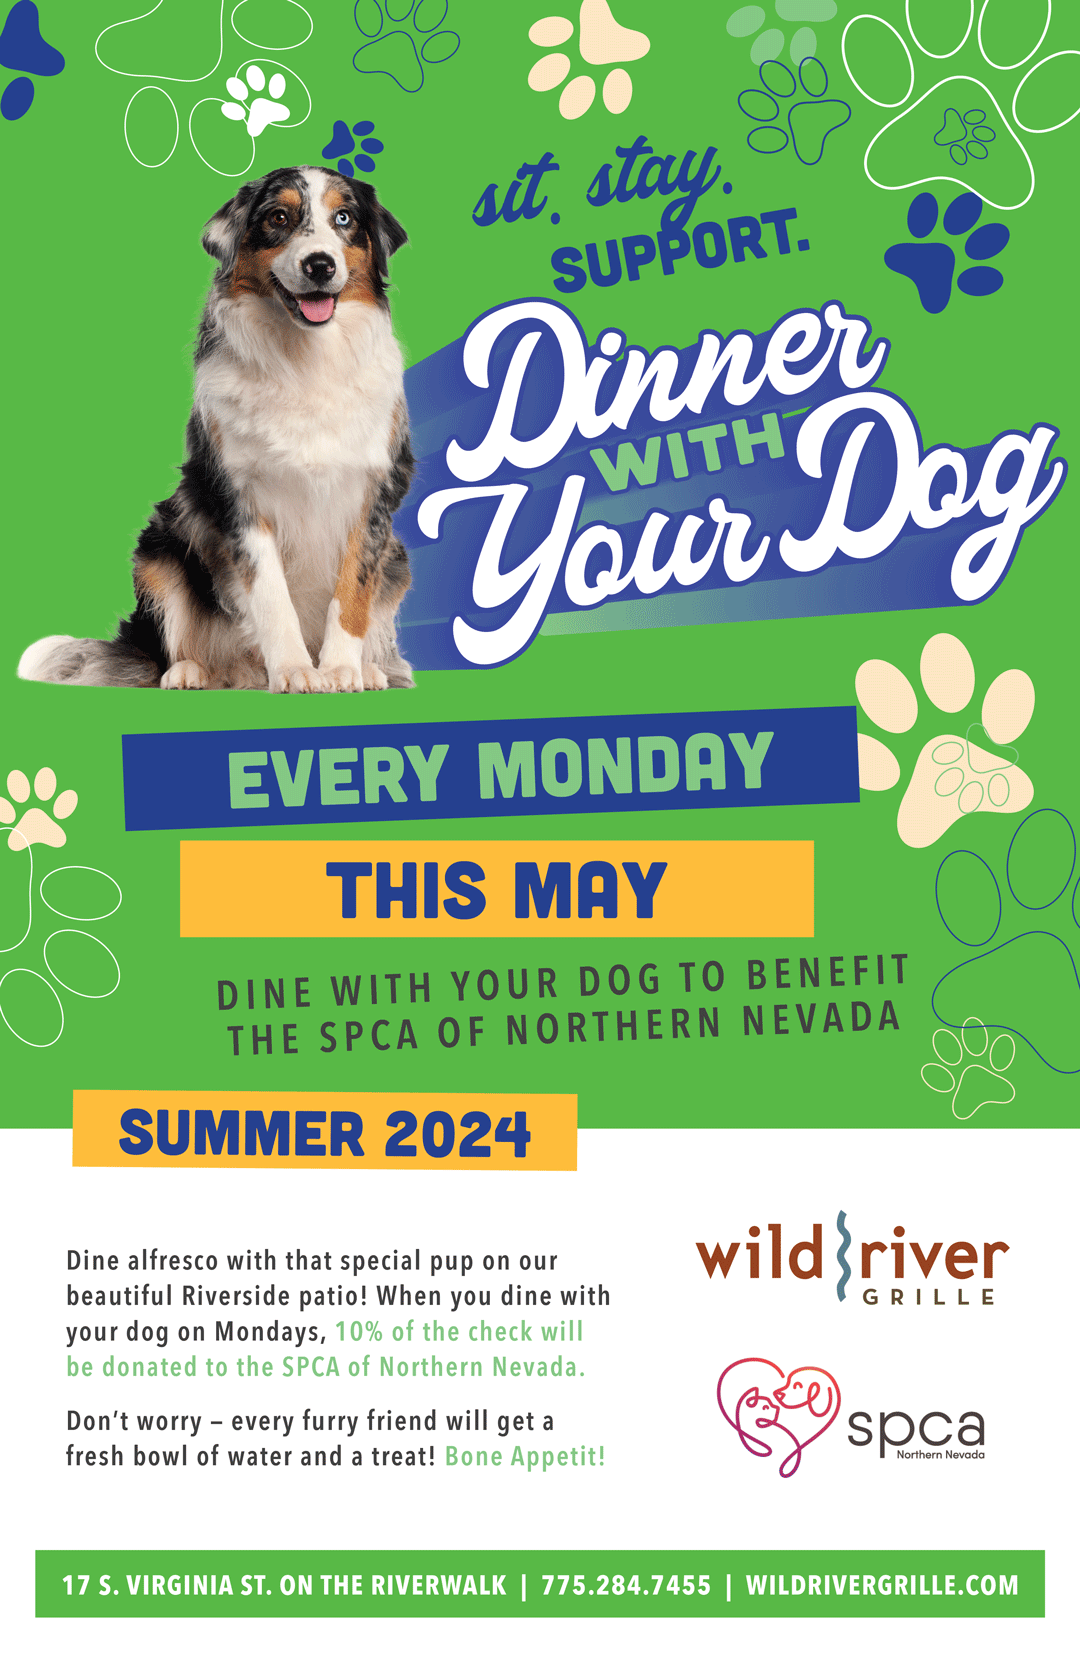 Dinner with your Dog, every Monday this May 2024. Dine with your dog and 10% of the check will be donated to the SPCA of Northern Nevada.